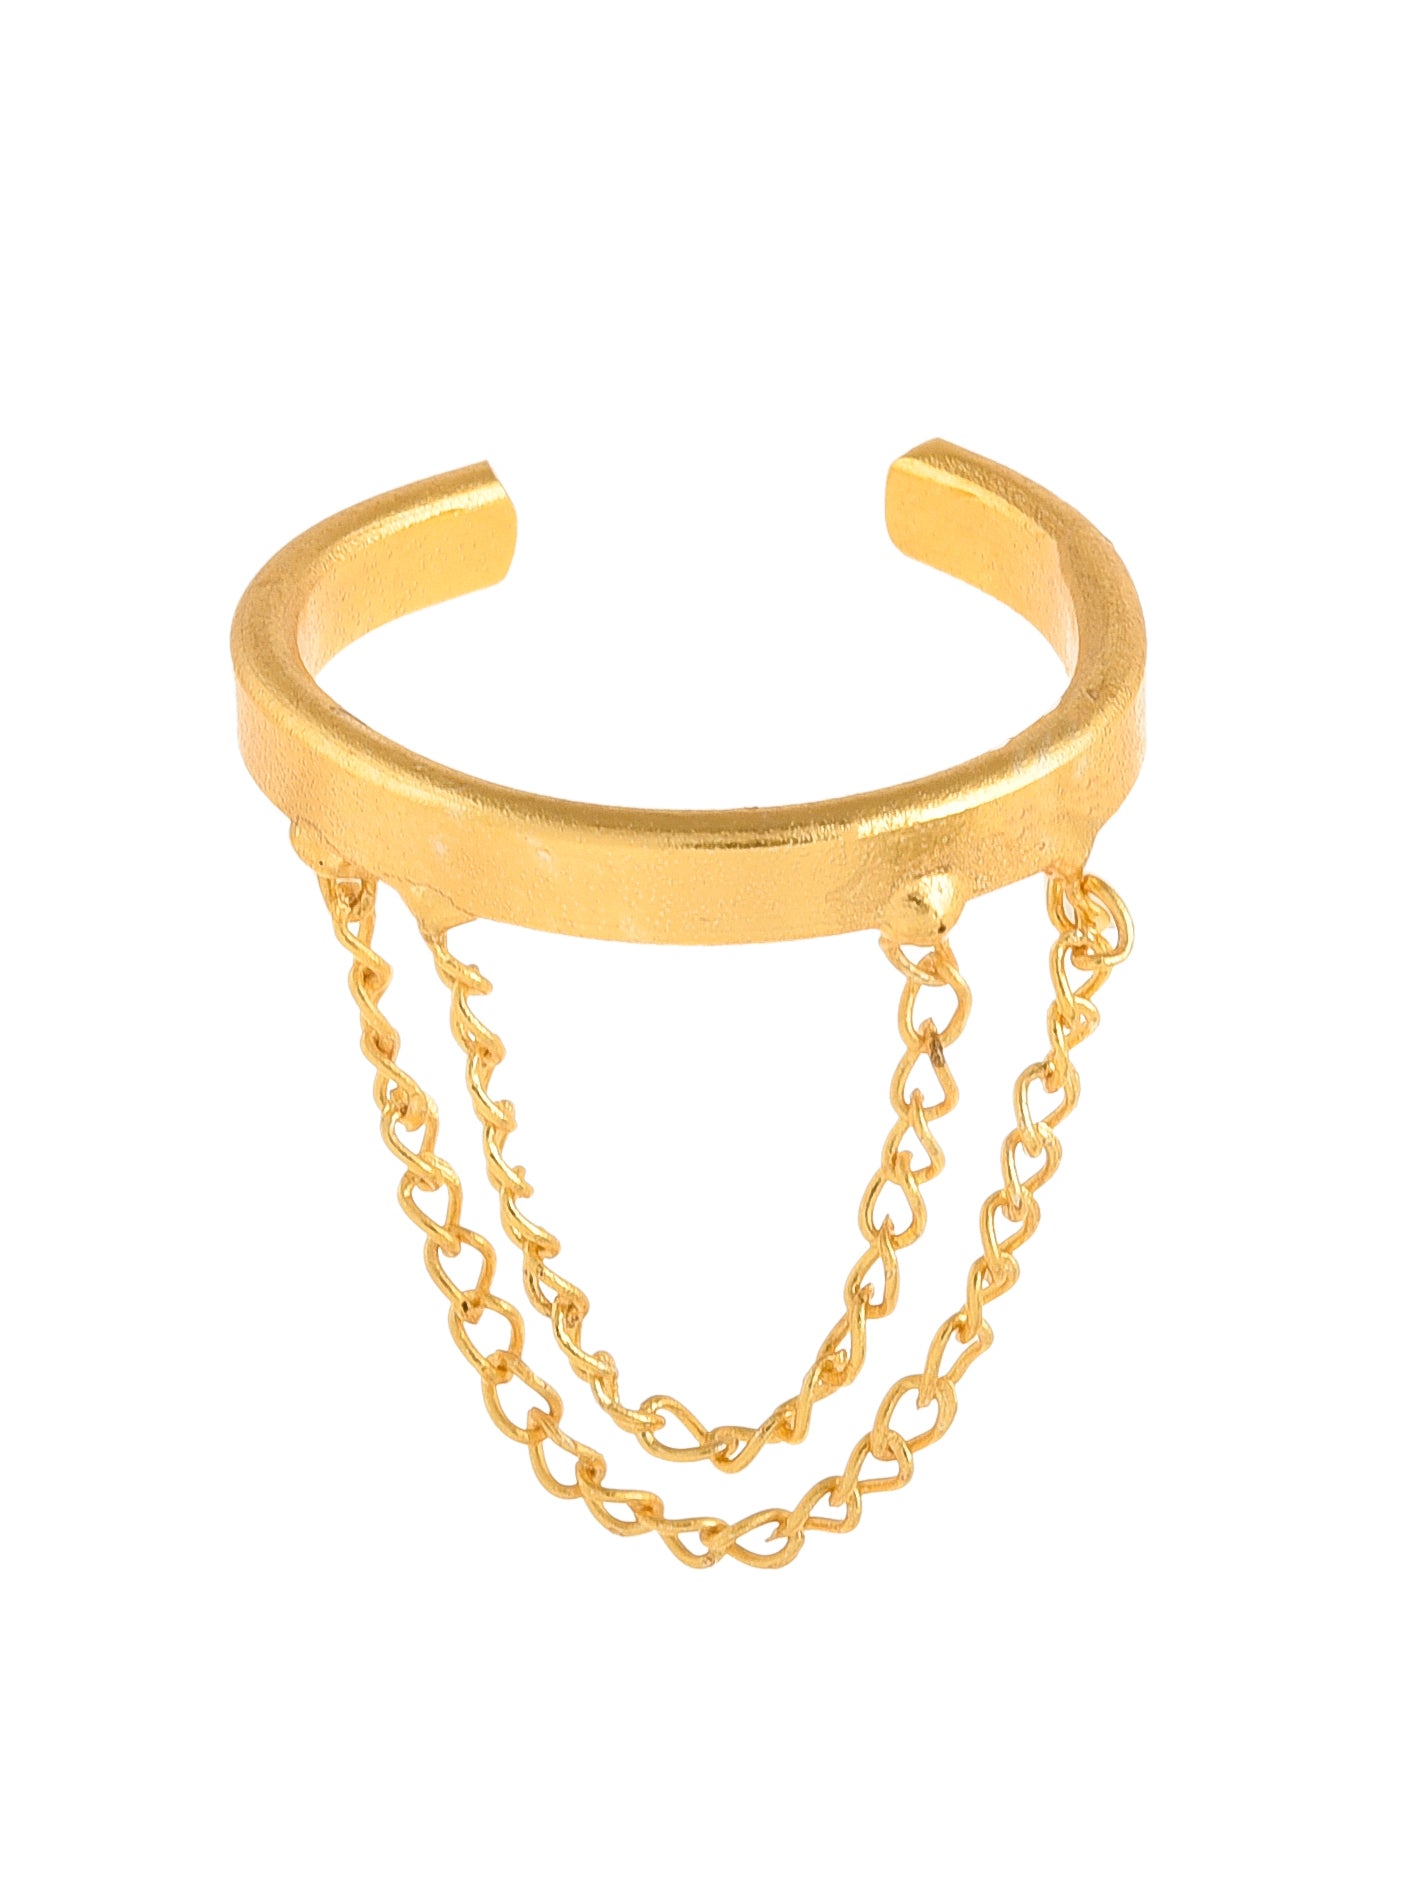 Gold Chain Ring Gold Stacking Ring Thick Chain Ring Curb - Etsy | Chain ring  gold, Linking rings, Chain ring